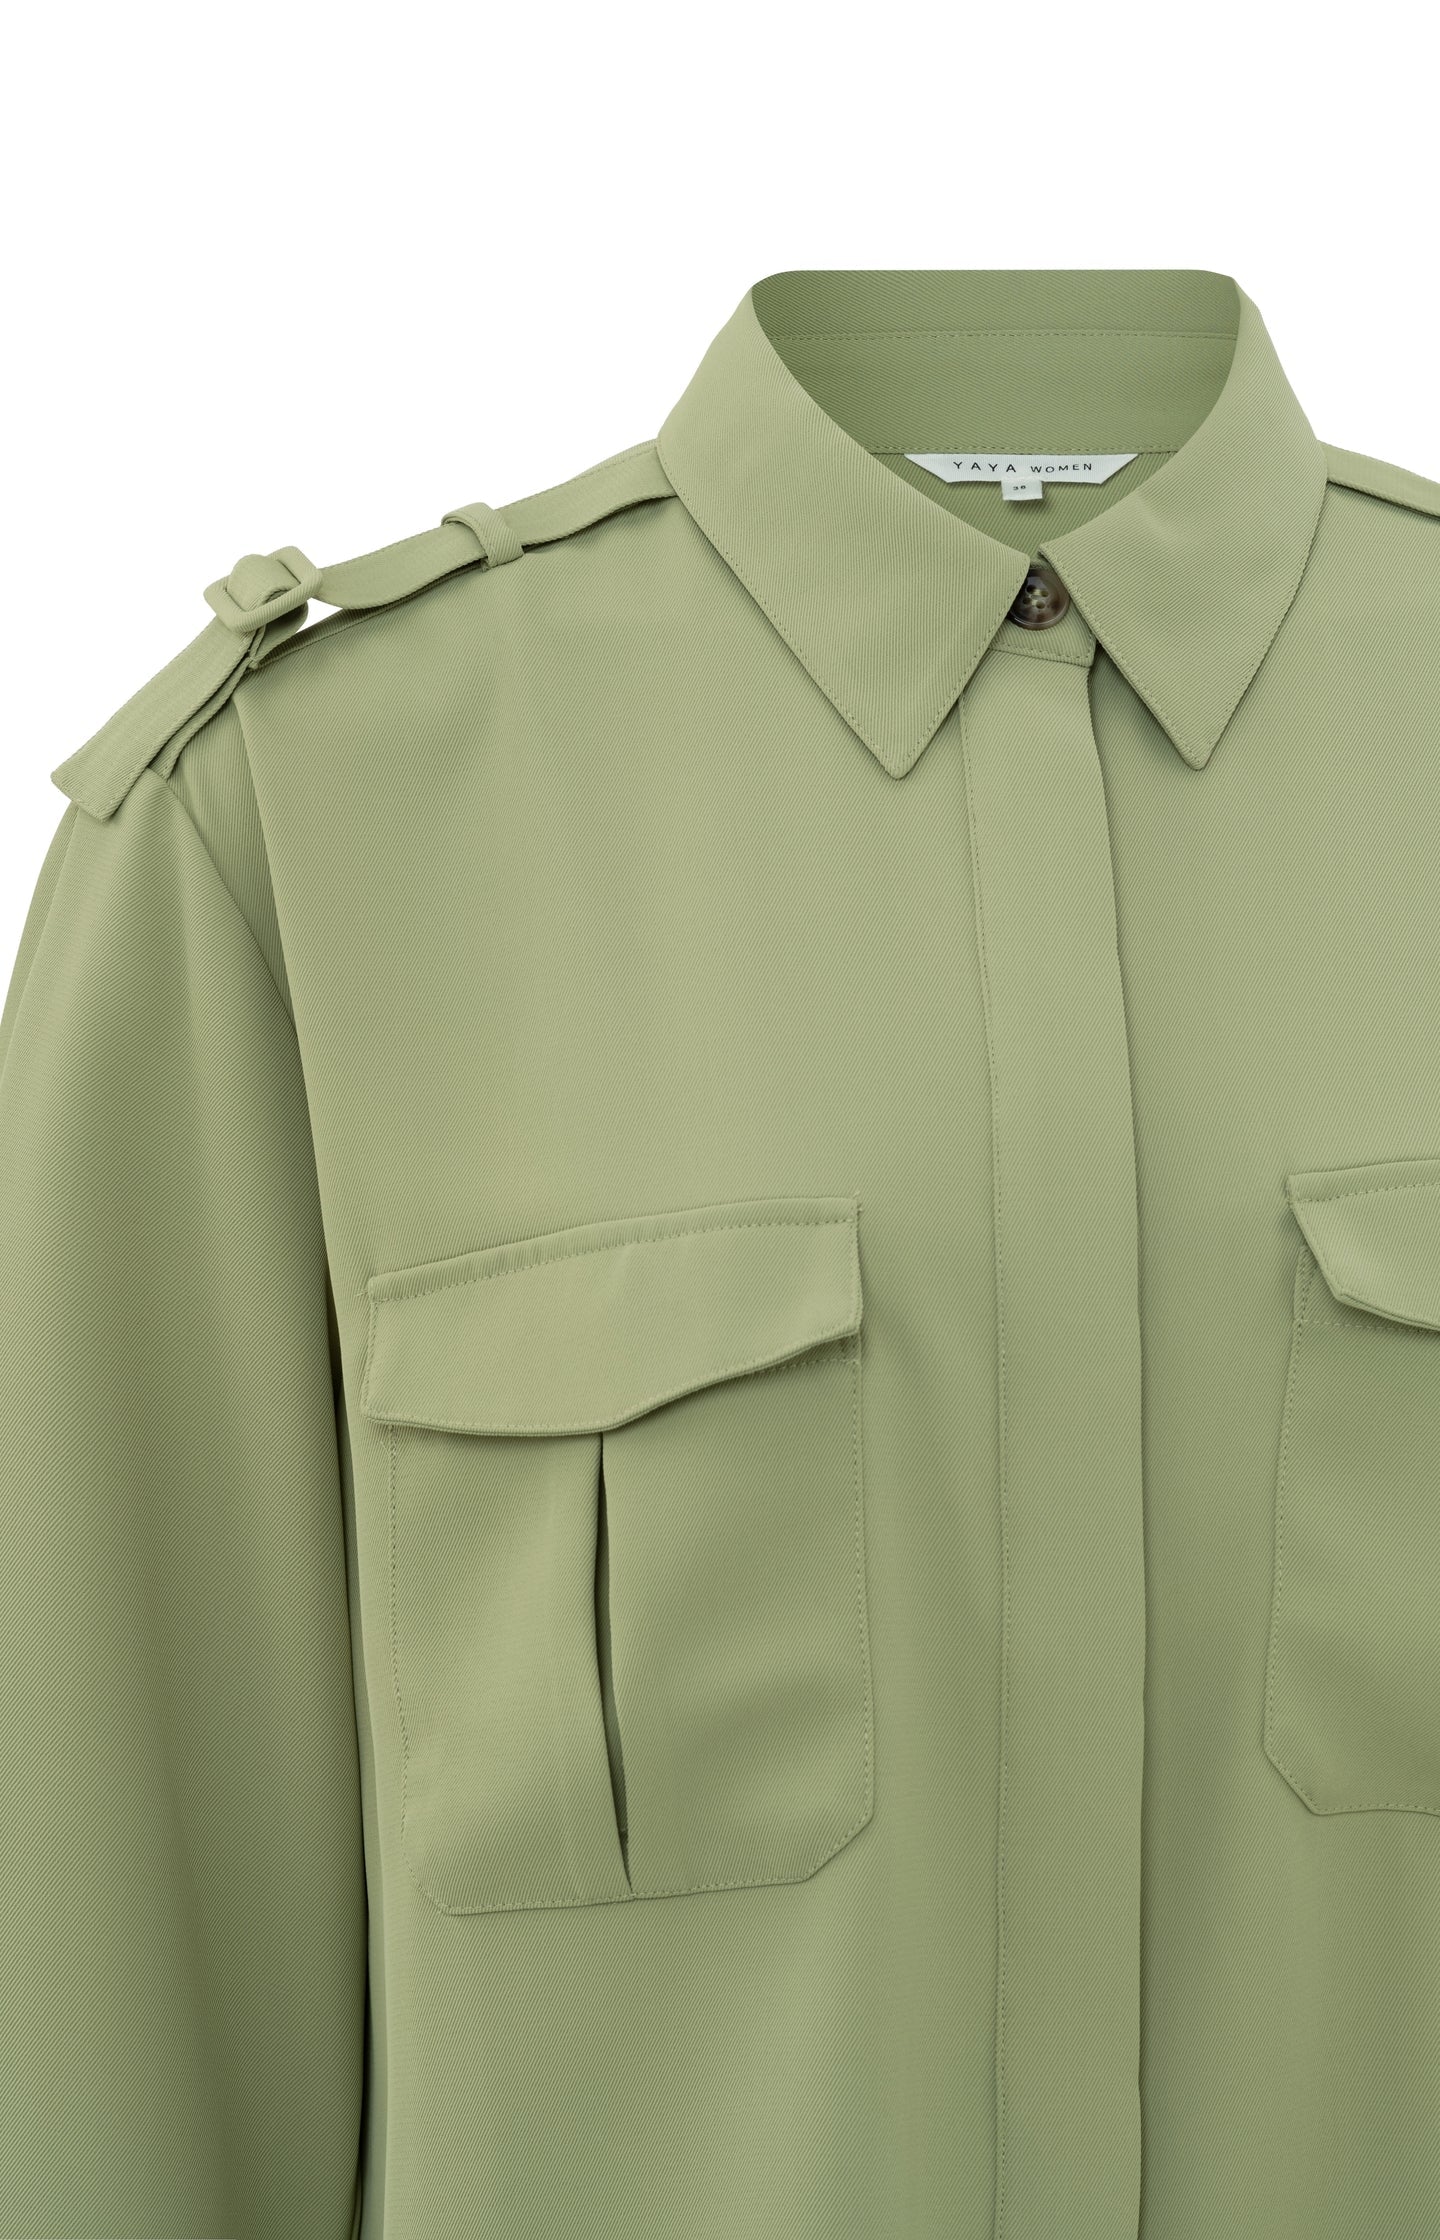 Cargo Jacket with Collar in Sage Green